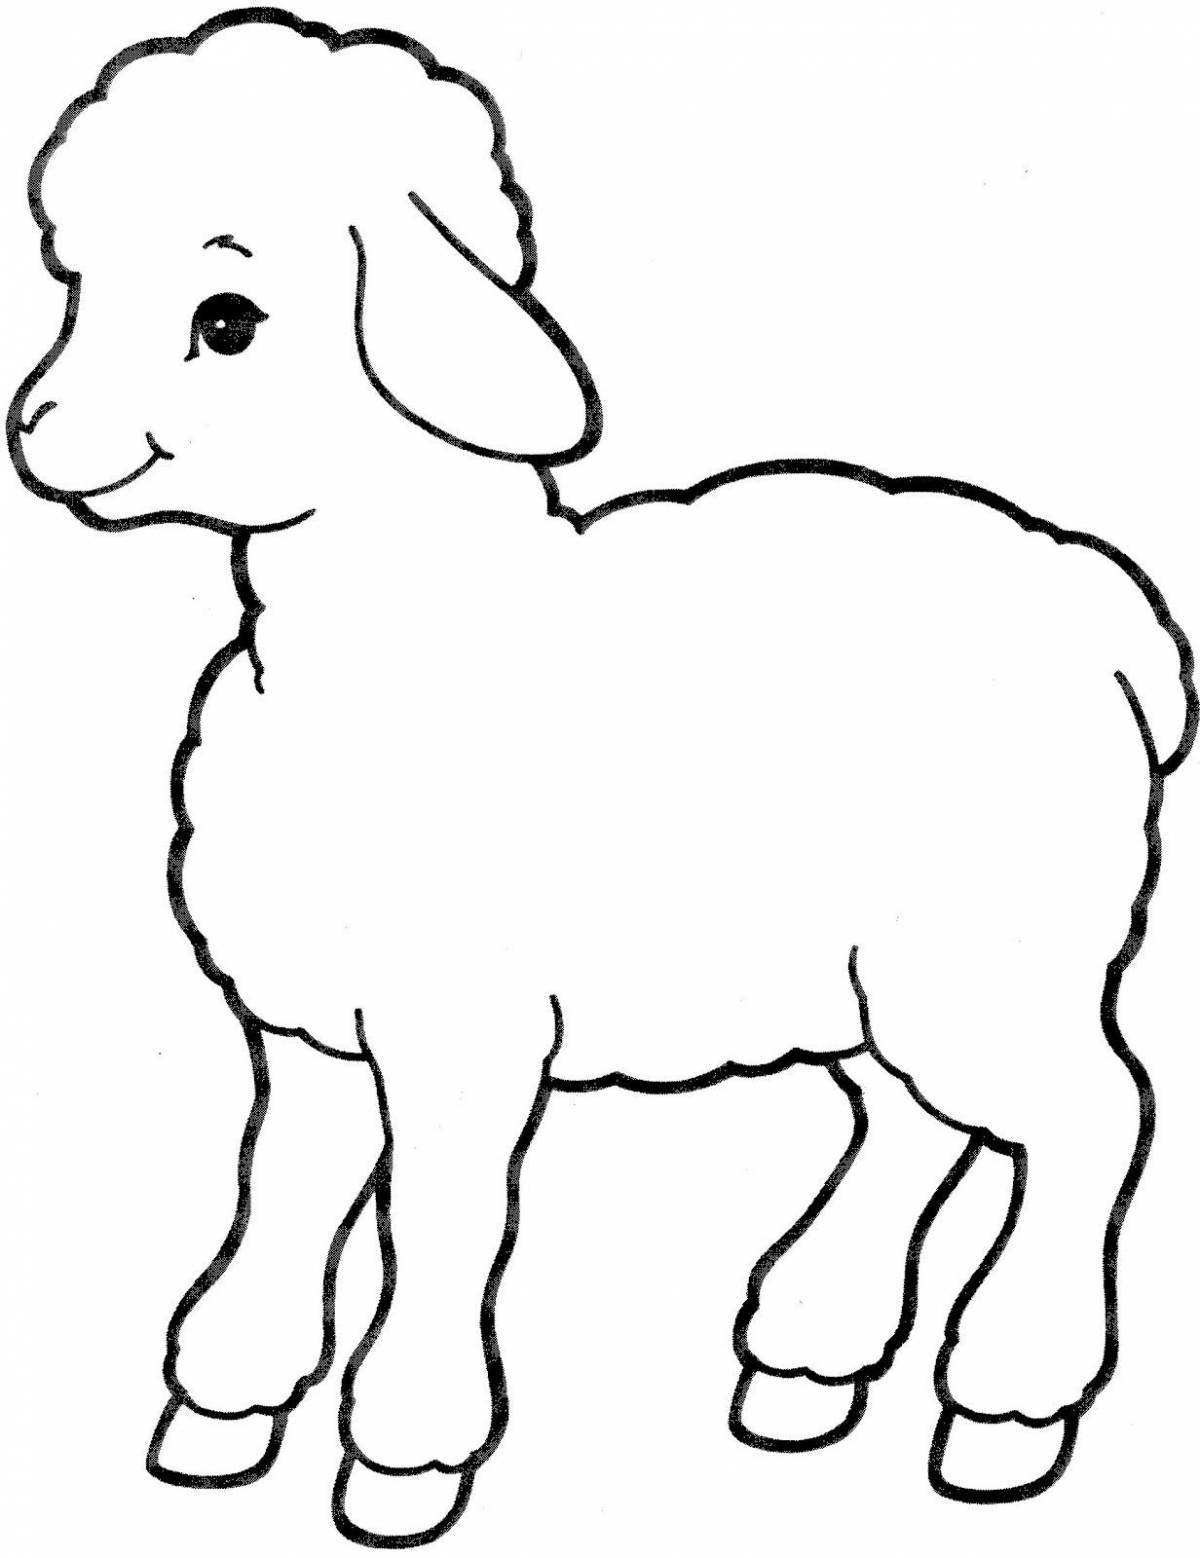 Children's lovely sheep coloring book